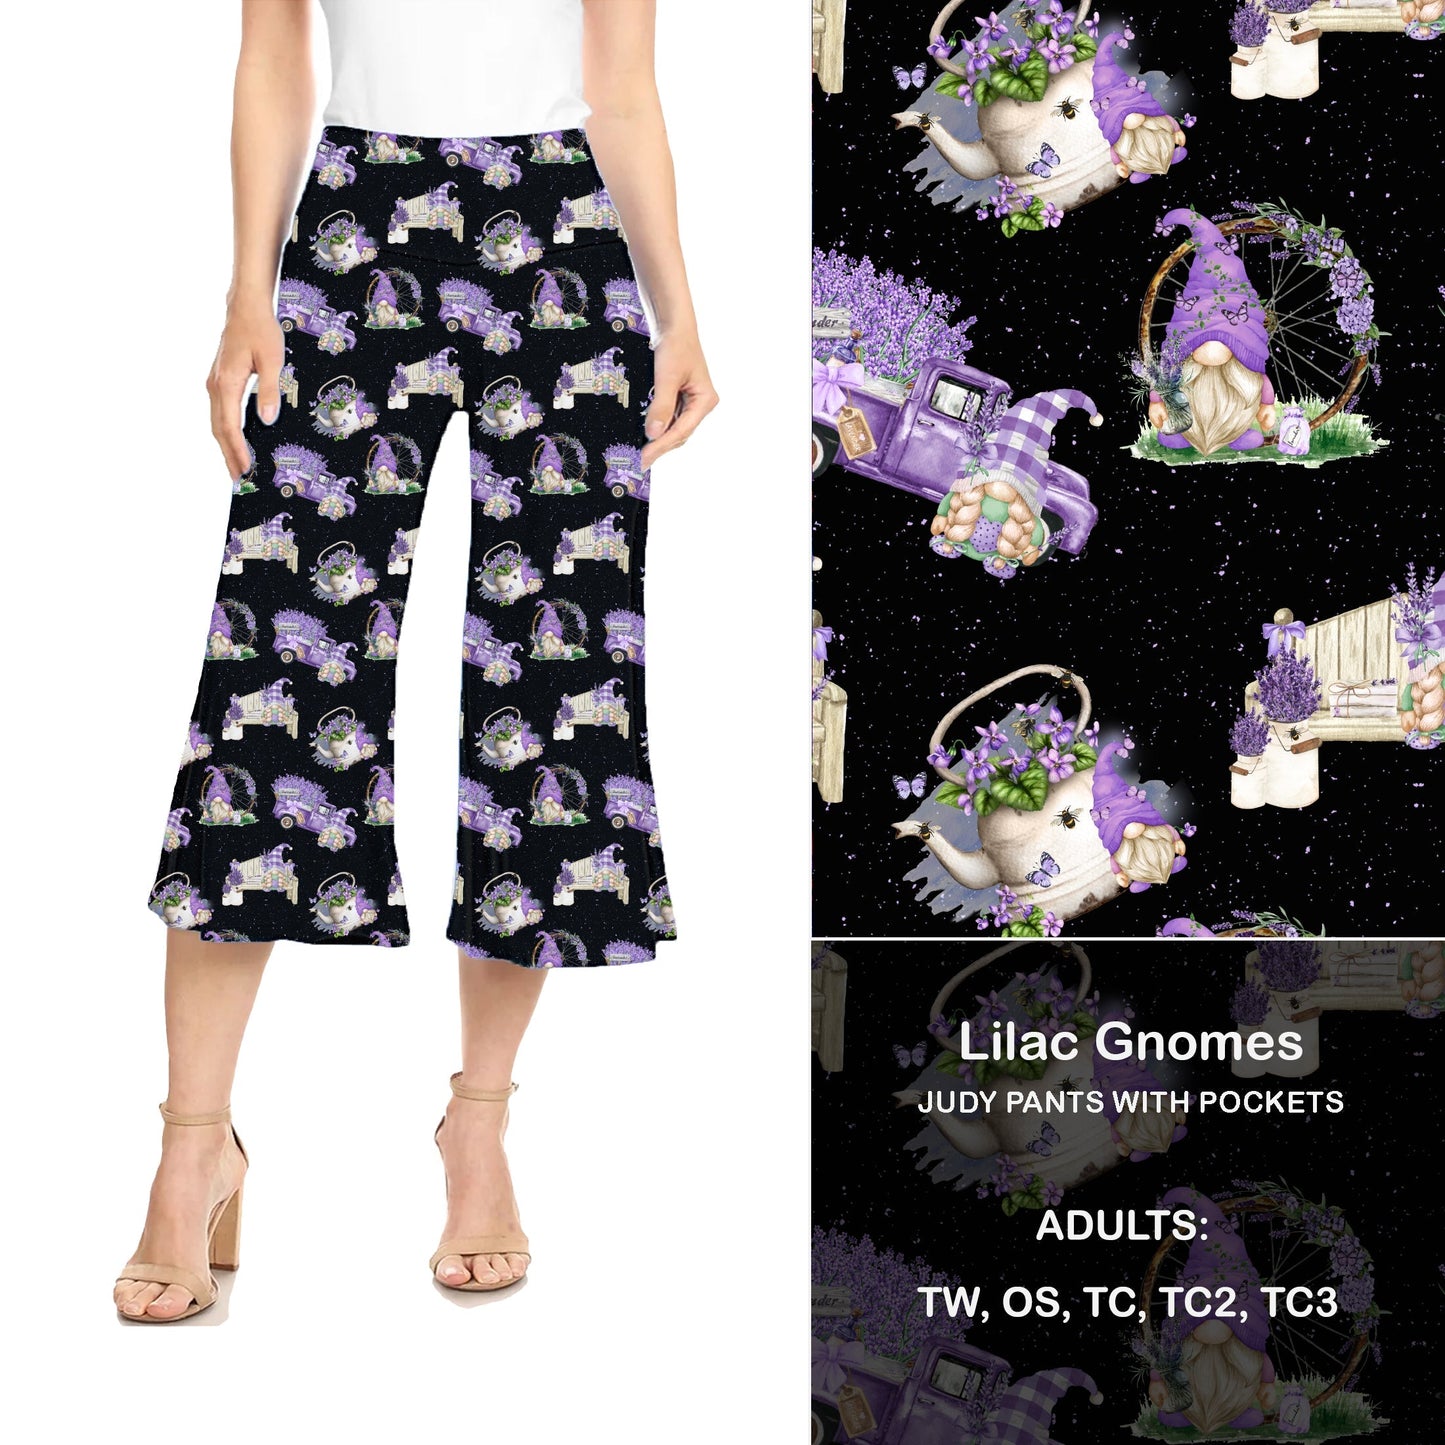 Lavender Gnomes Judy Hybrid Pants with Pockets